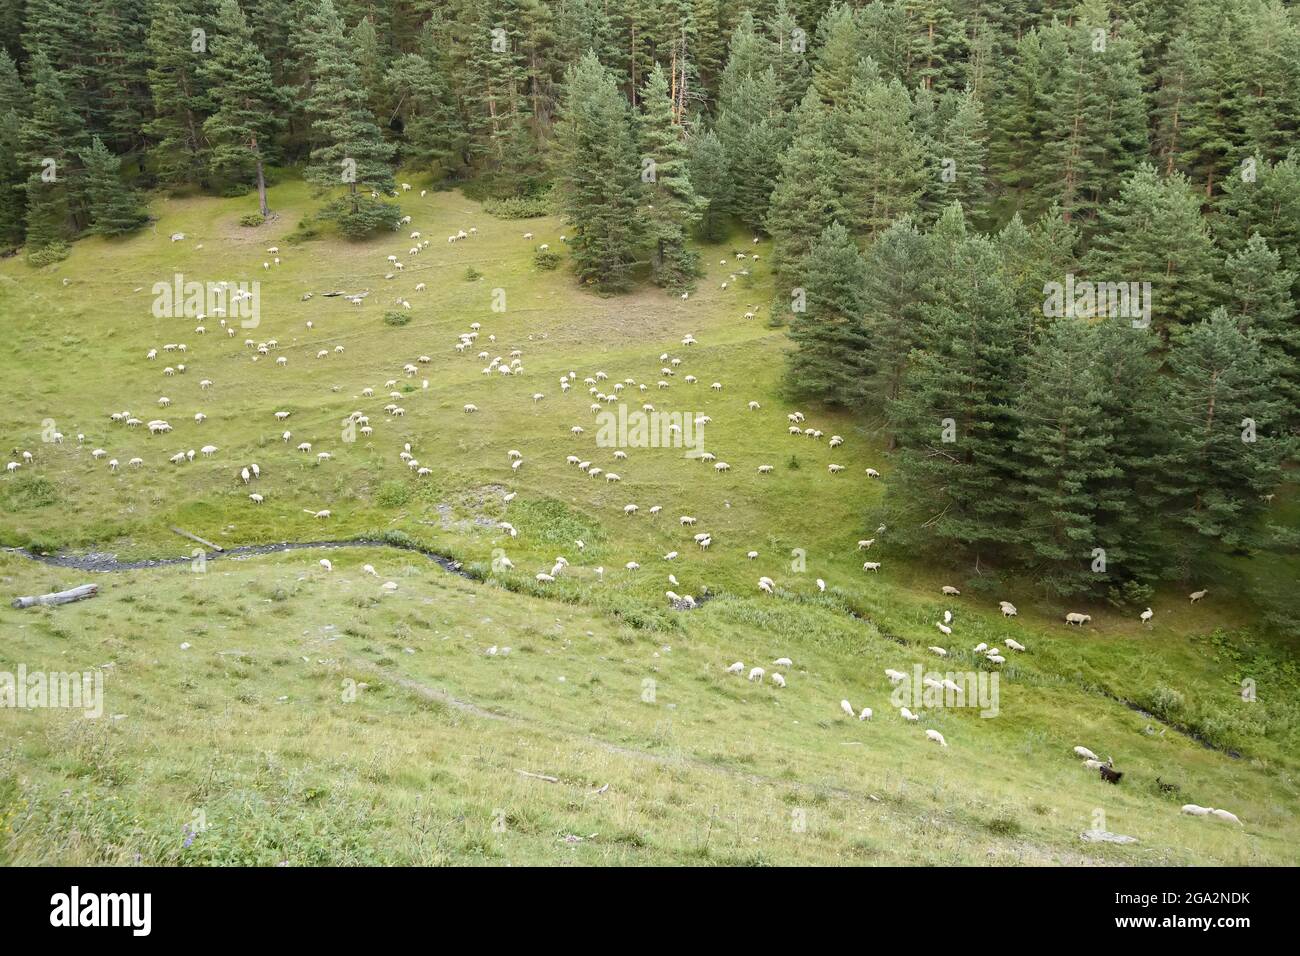 Aerial view of sheep (Ovis aries) grazing in a field with a stream next to a forest outside of the village of Shenako in the highlands of the Tushe... Stock Photo